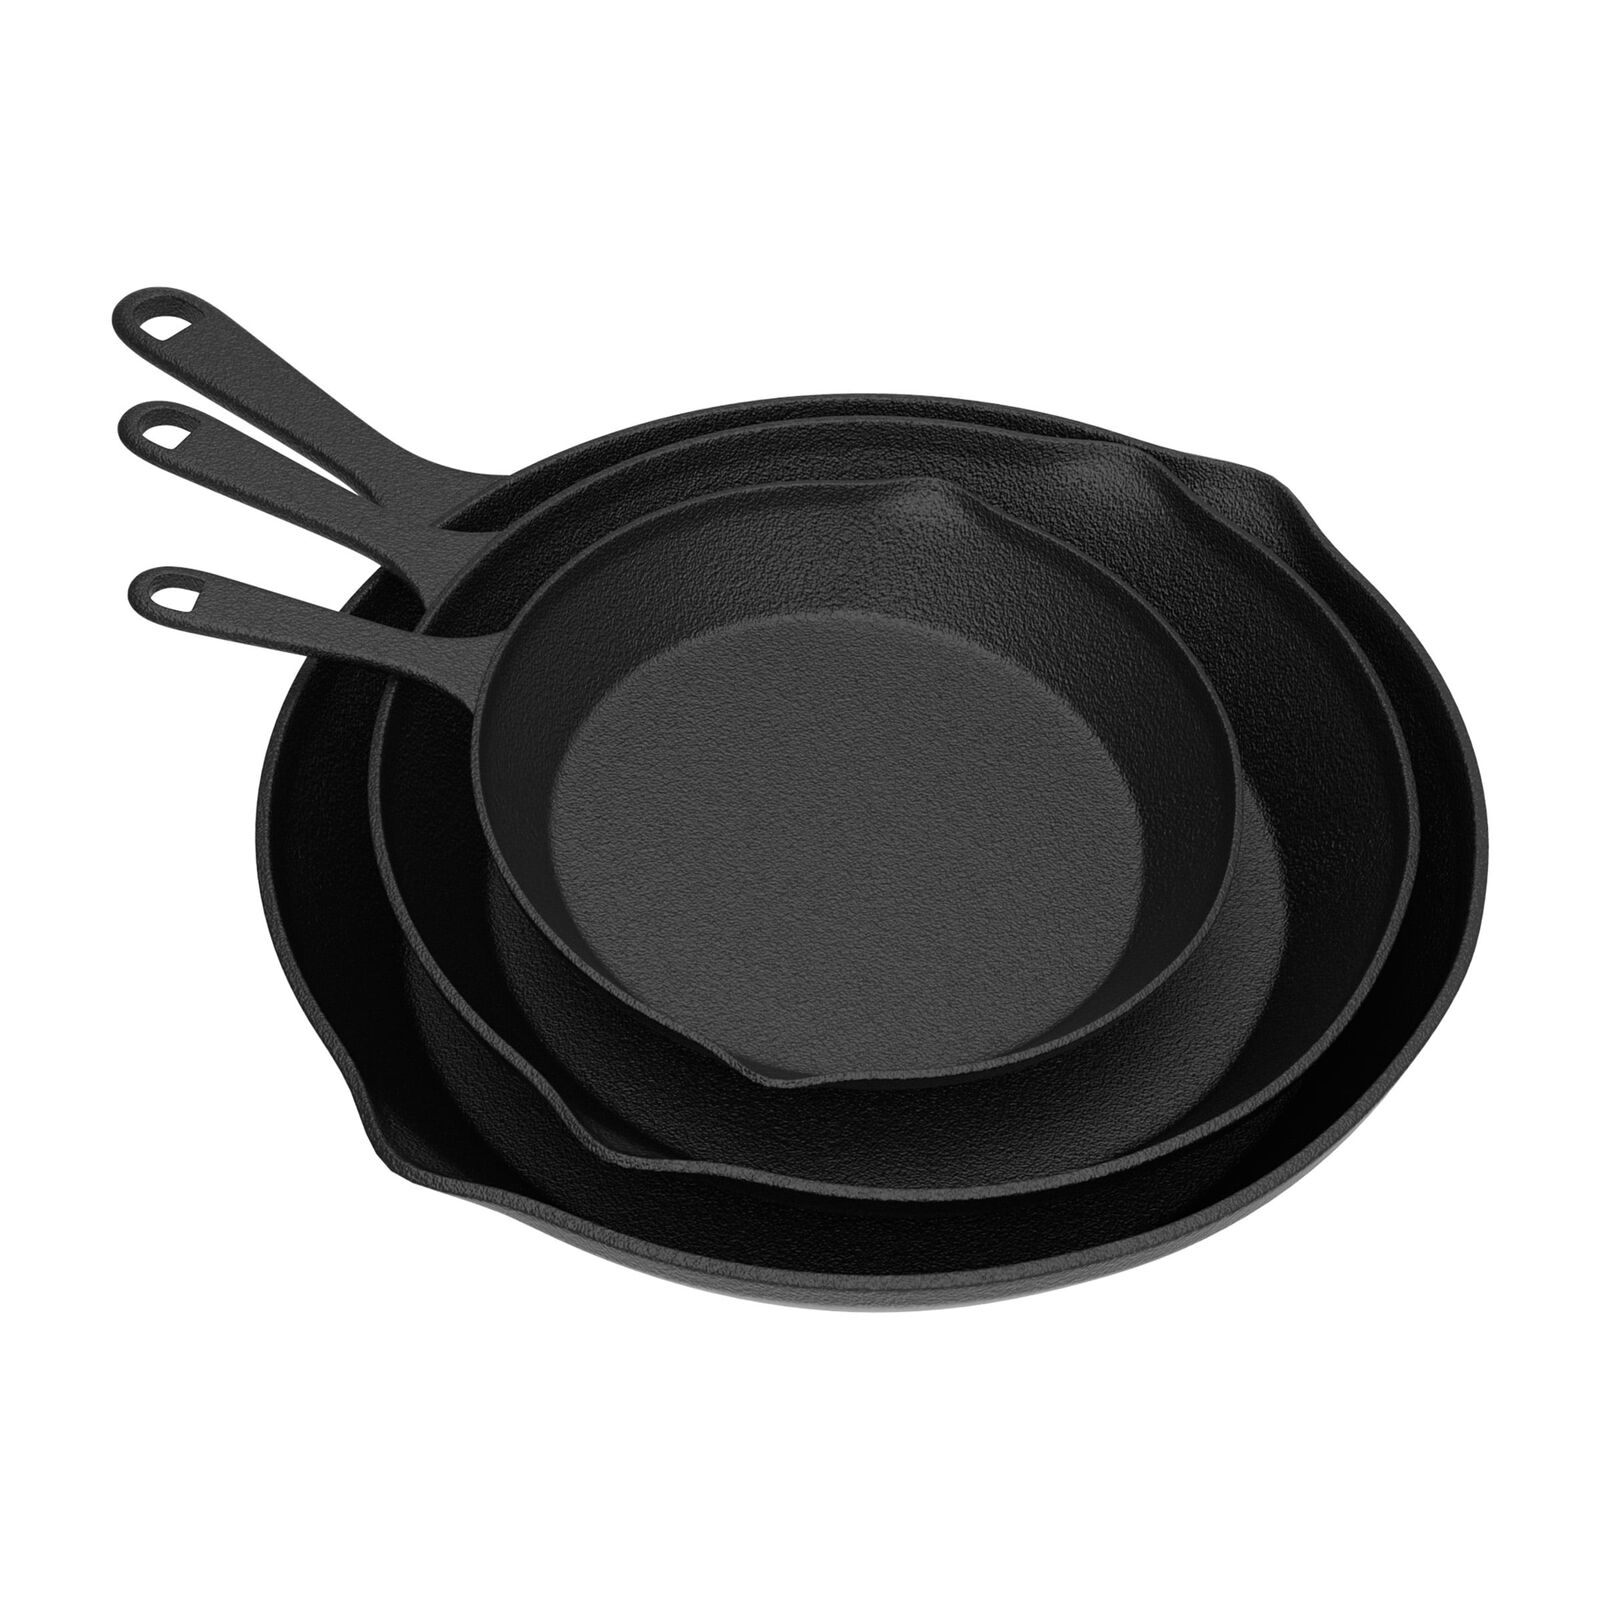 NEW Frying Pans-Set of 3 Cast Iron Pre-Seasoned Nonstick Skillets in 10”, 8”, 6”